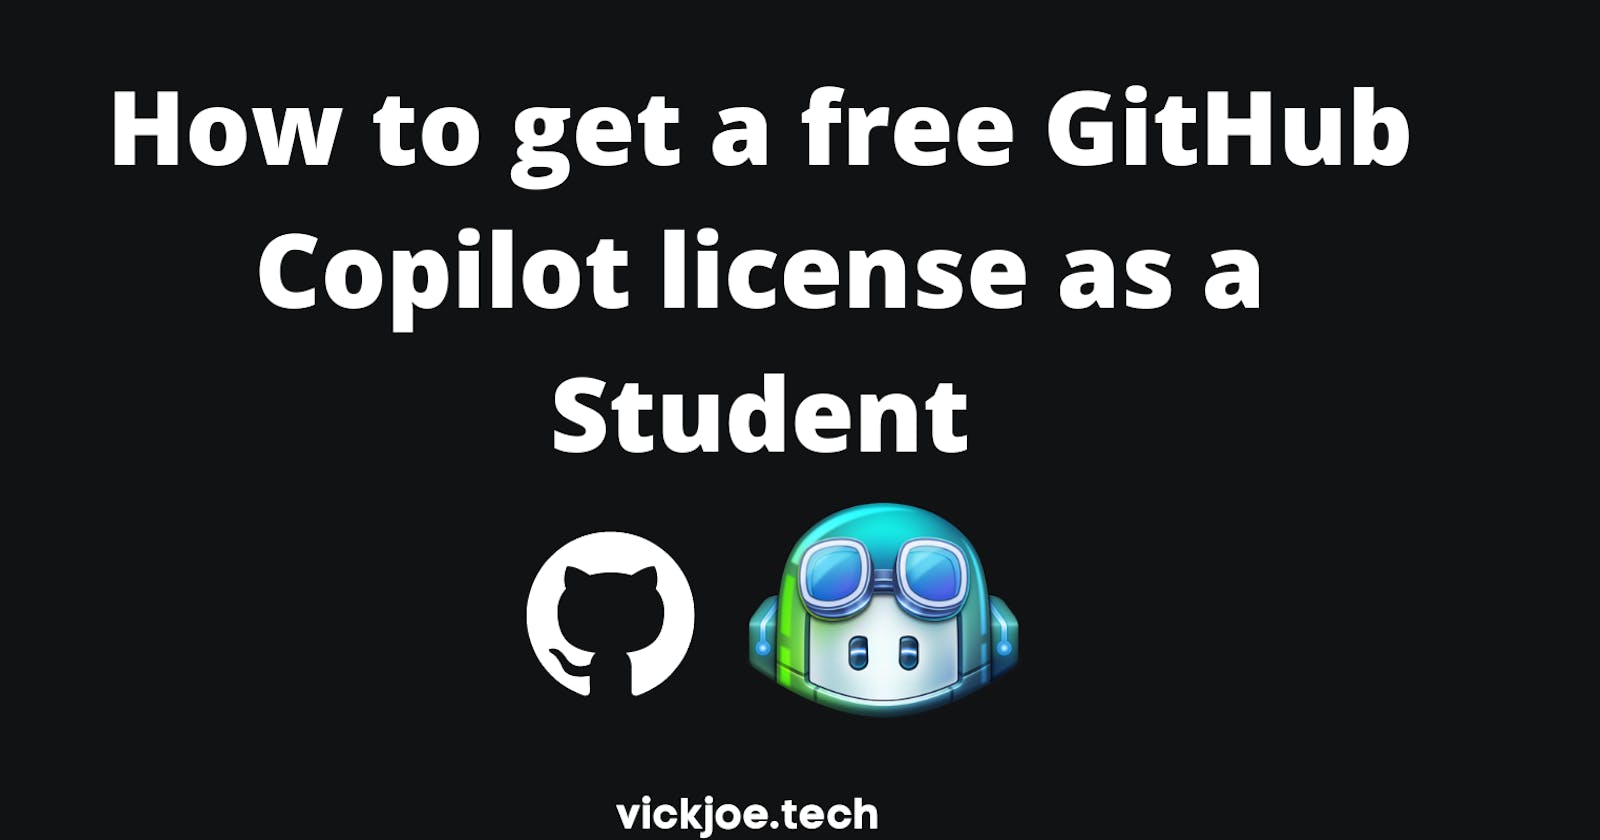 Get a "FREE" GitHub Co-Pilot license as a student